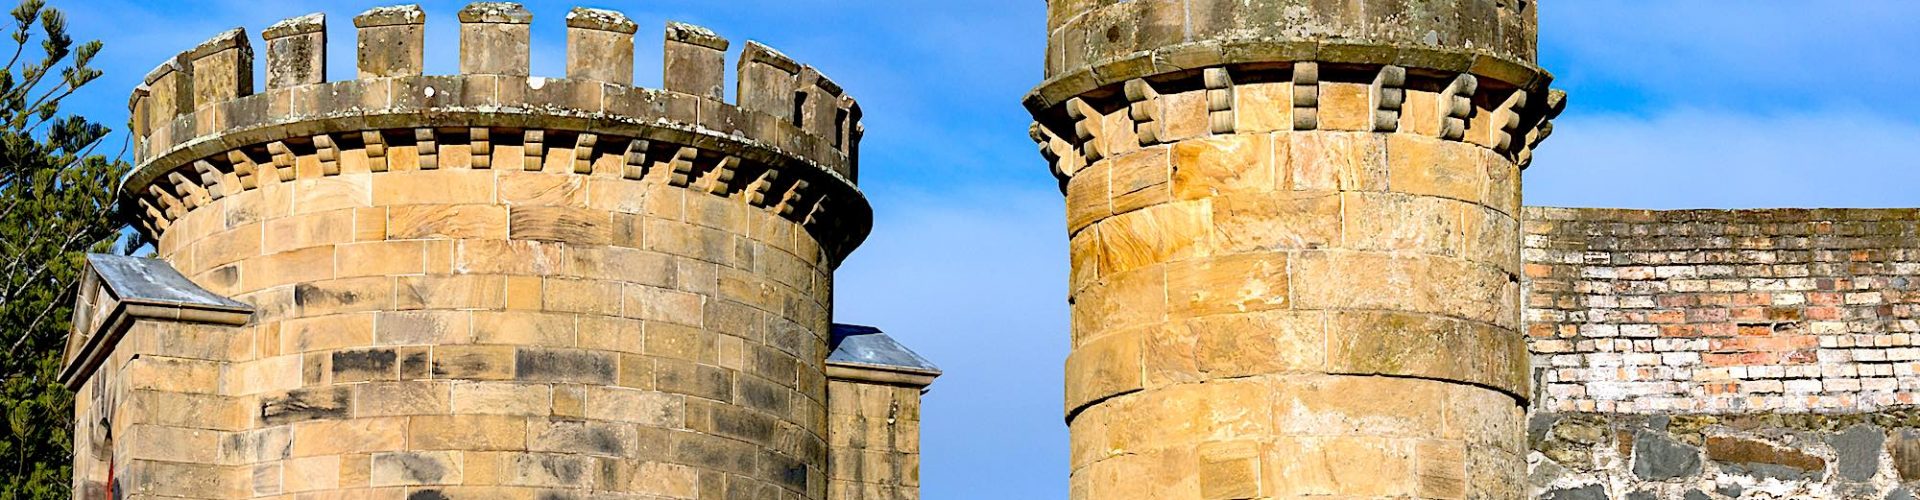 Review: Port Arthur Historic Site is a fascinating window on the convict era, TAS inner banner